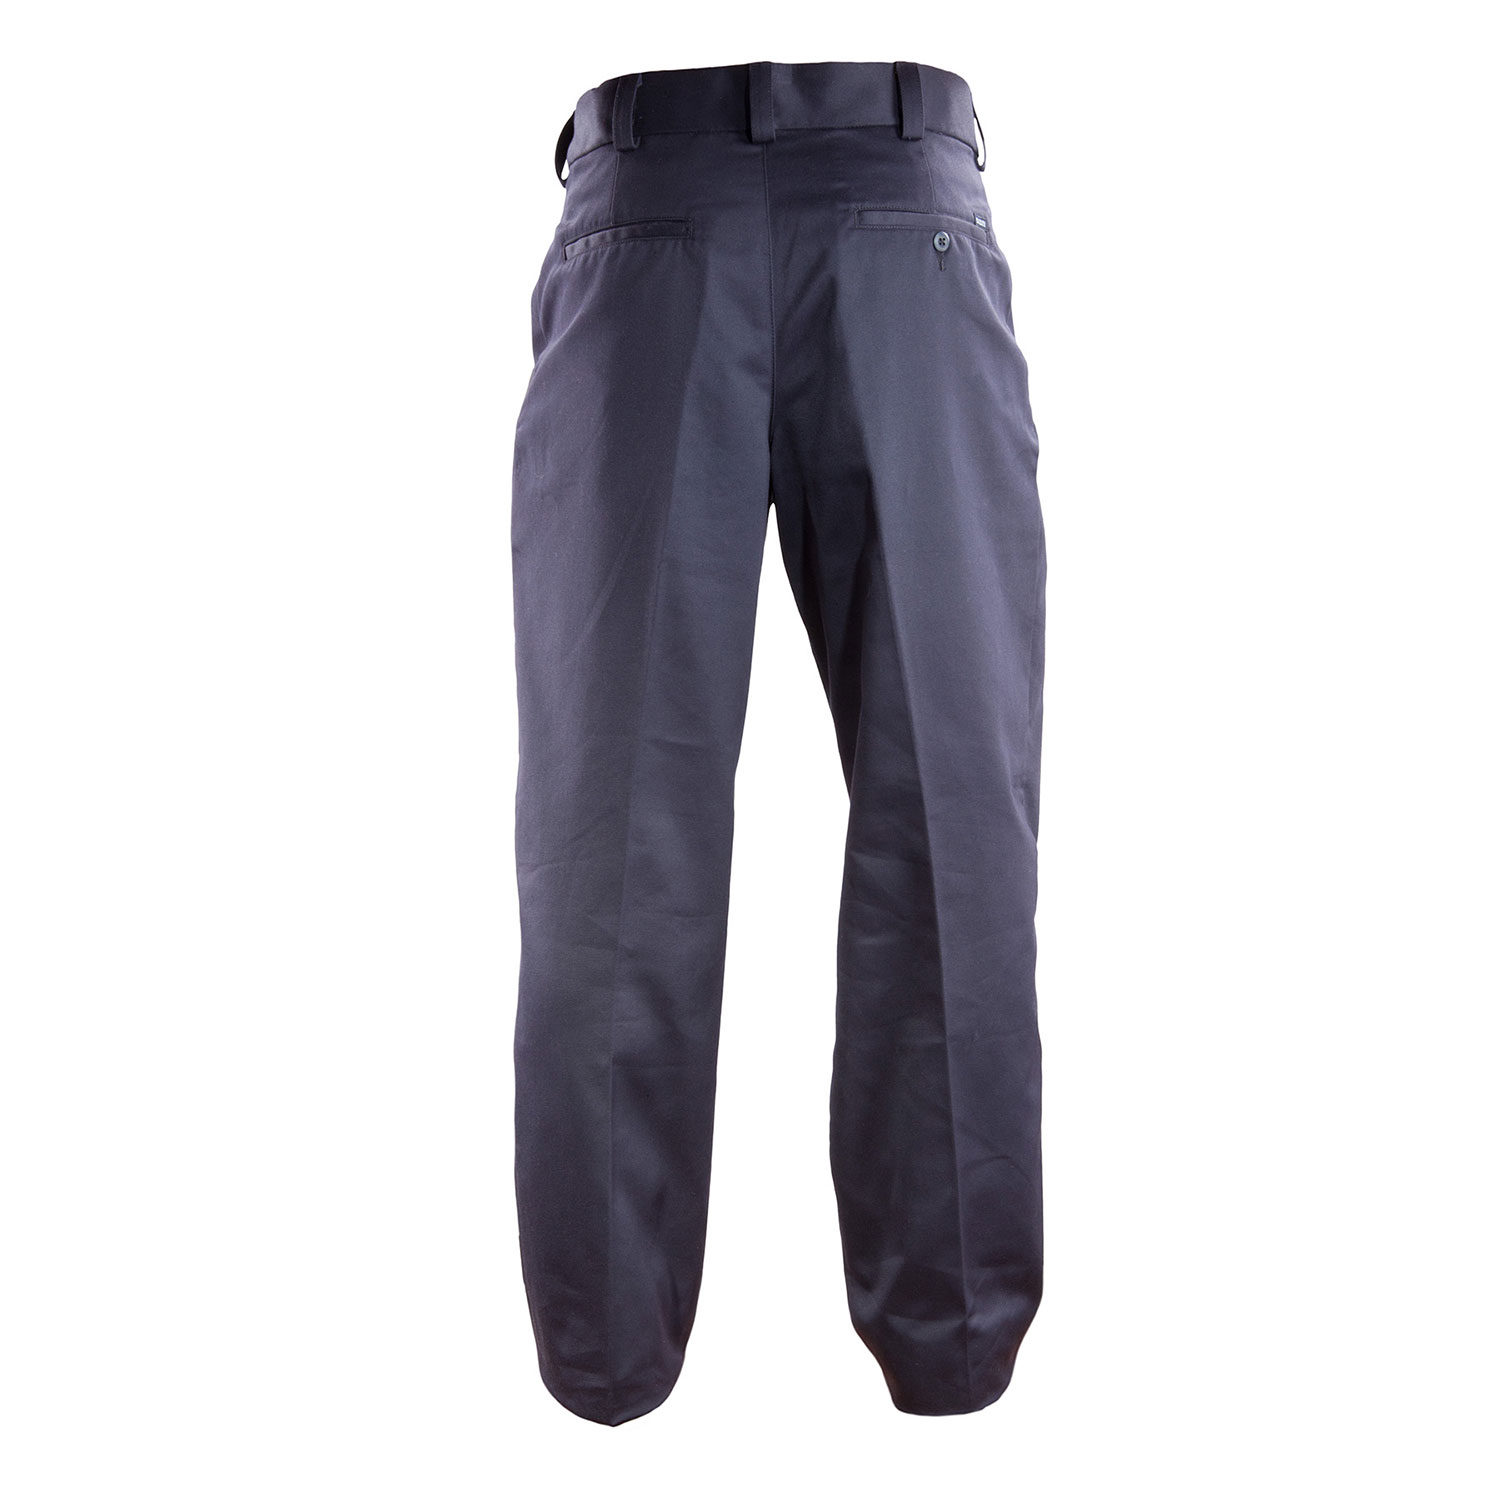 5.11 Tactical Firefighter Stationwear Pants